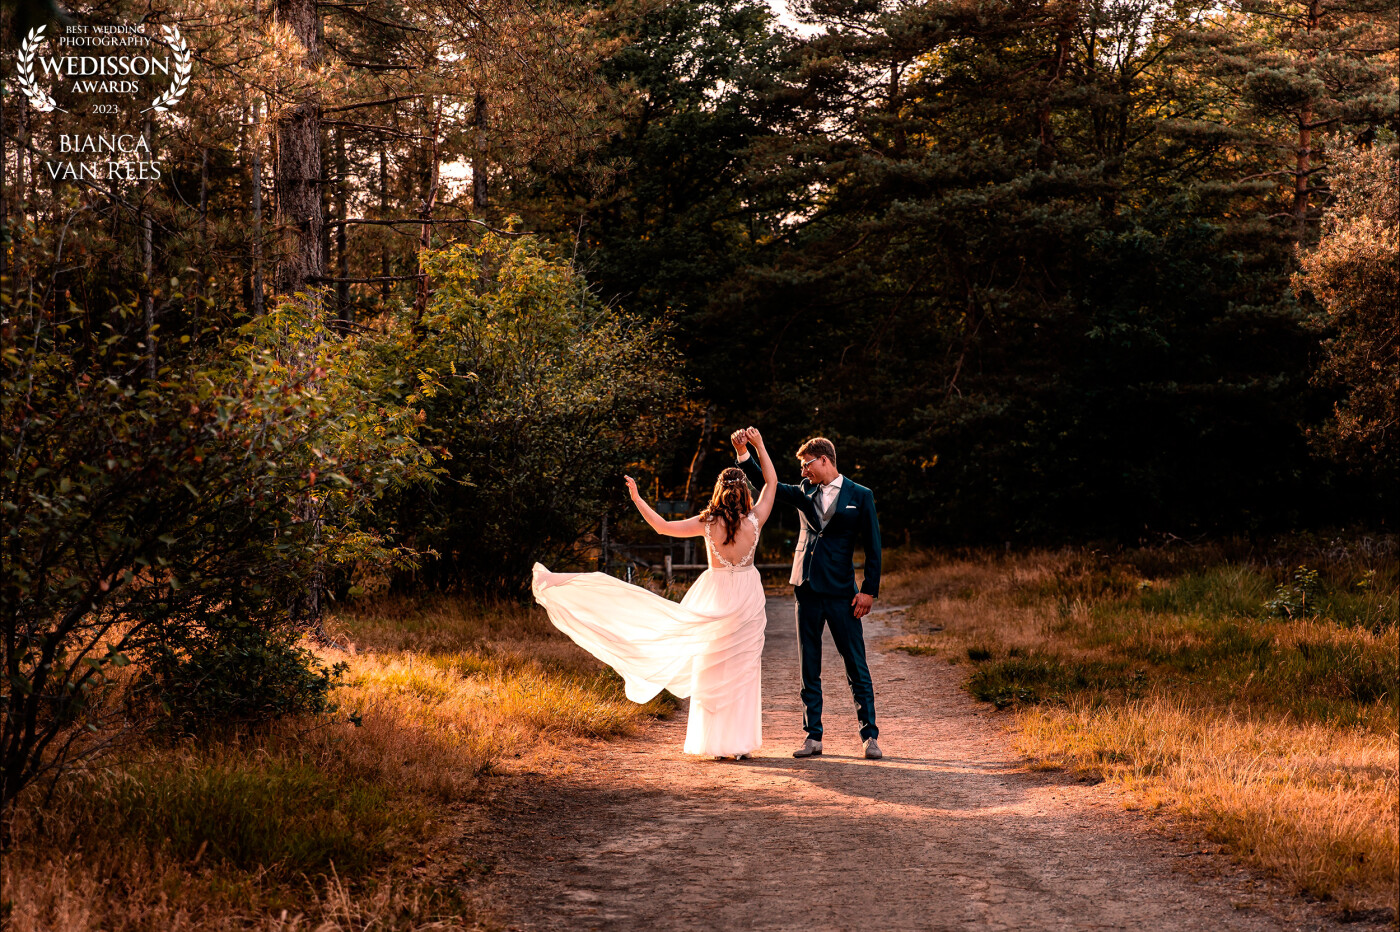 We planned the wedding reportage in the nearby forest in the evening after dinner, and we were gifted with a beautiful sun that day. The forest created a beautiful display of shadows and a ray of sunlight, in which I positioned the couple to create this fairy tale like image.